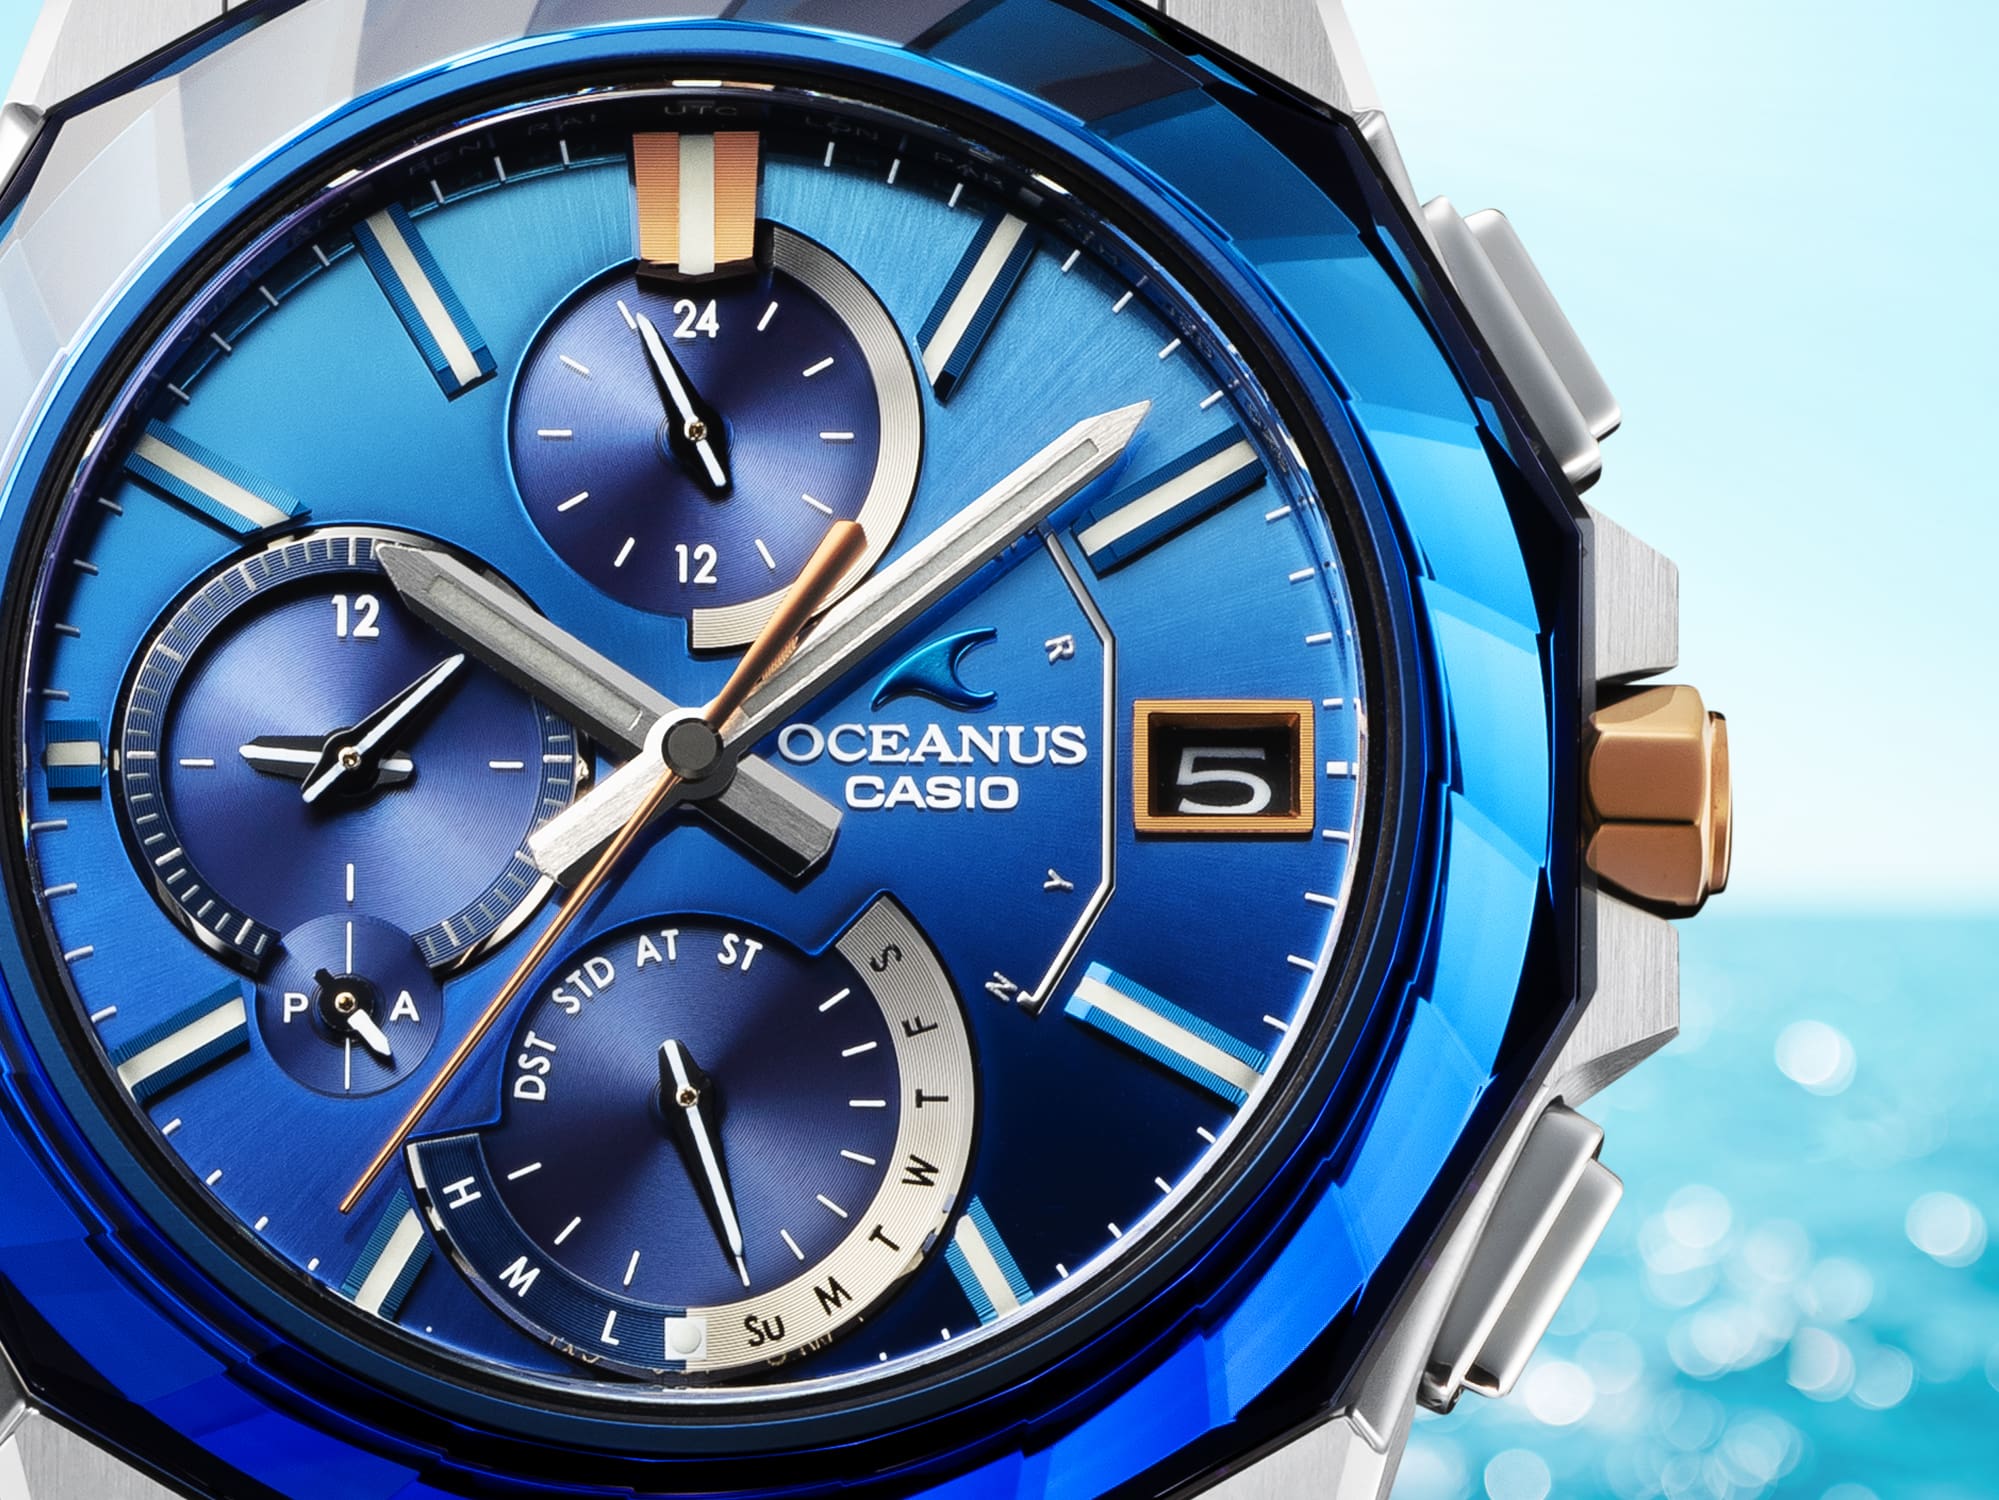 Close up of OCEANUS OCWS6000SW-2A Analog watch with blue face and bezel